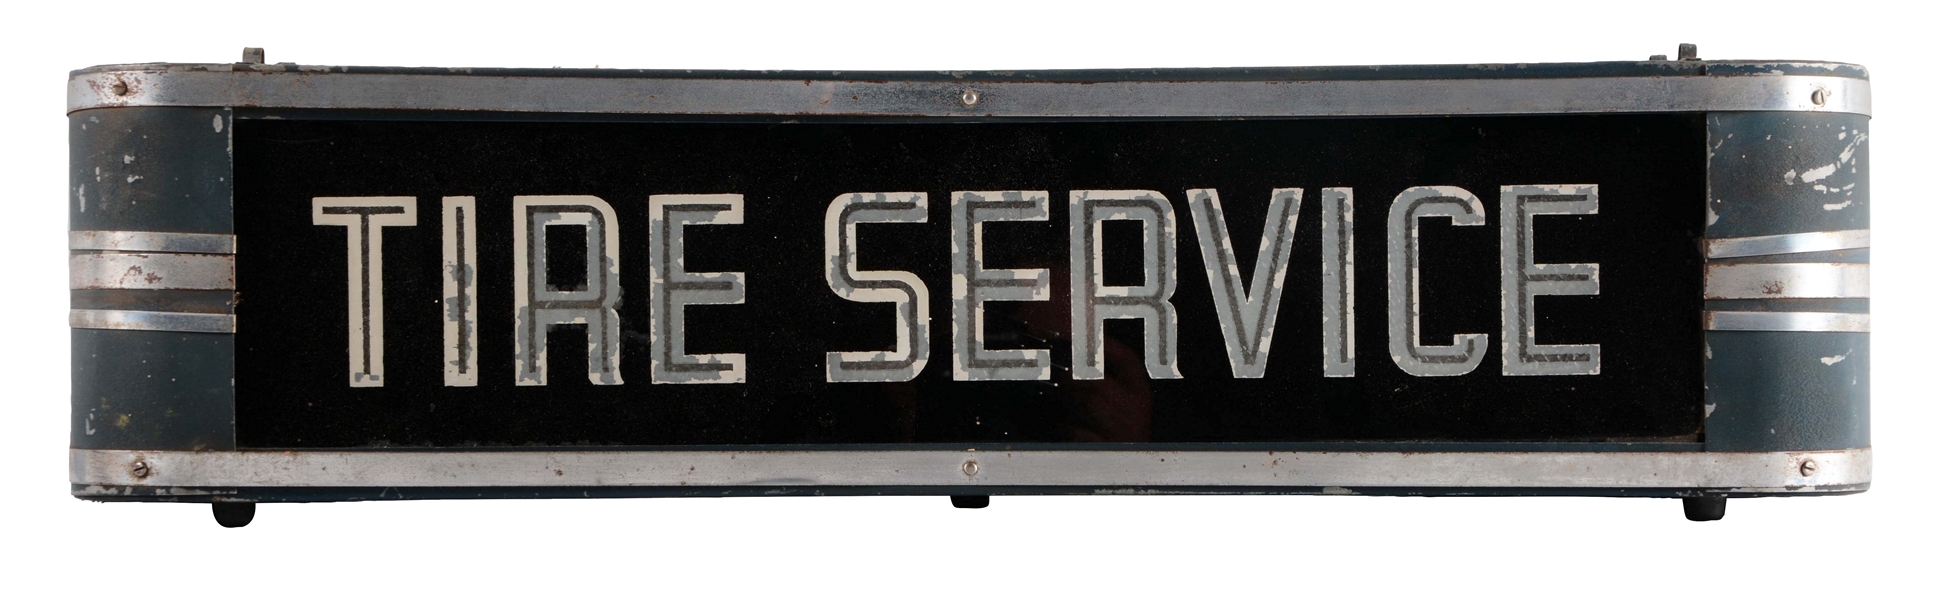 TIRE SERVICE REVERSE GLASS LIGHT UP SIGN IN METAL CASE.